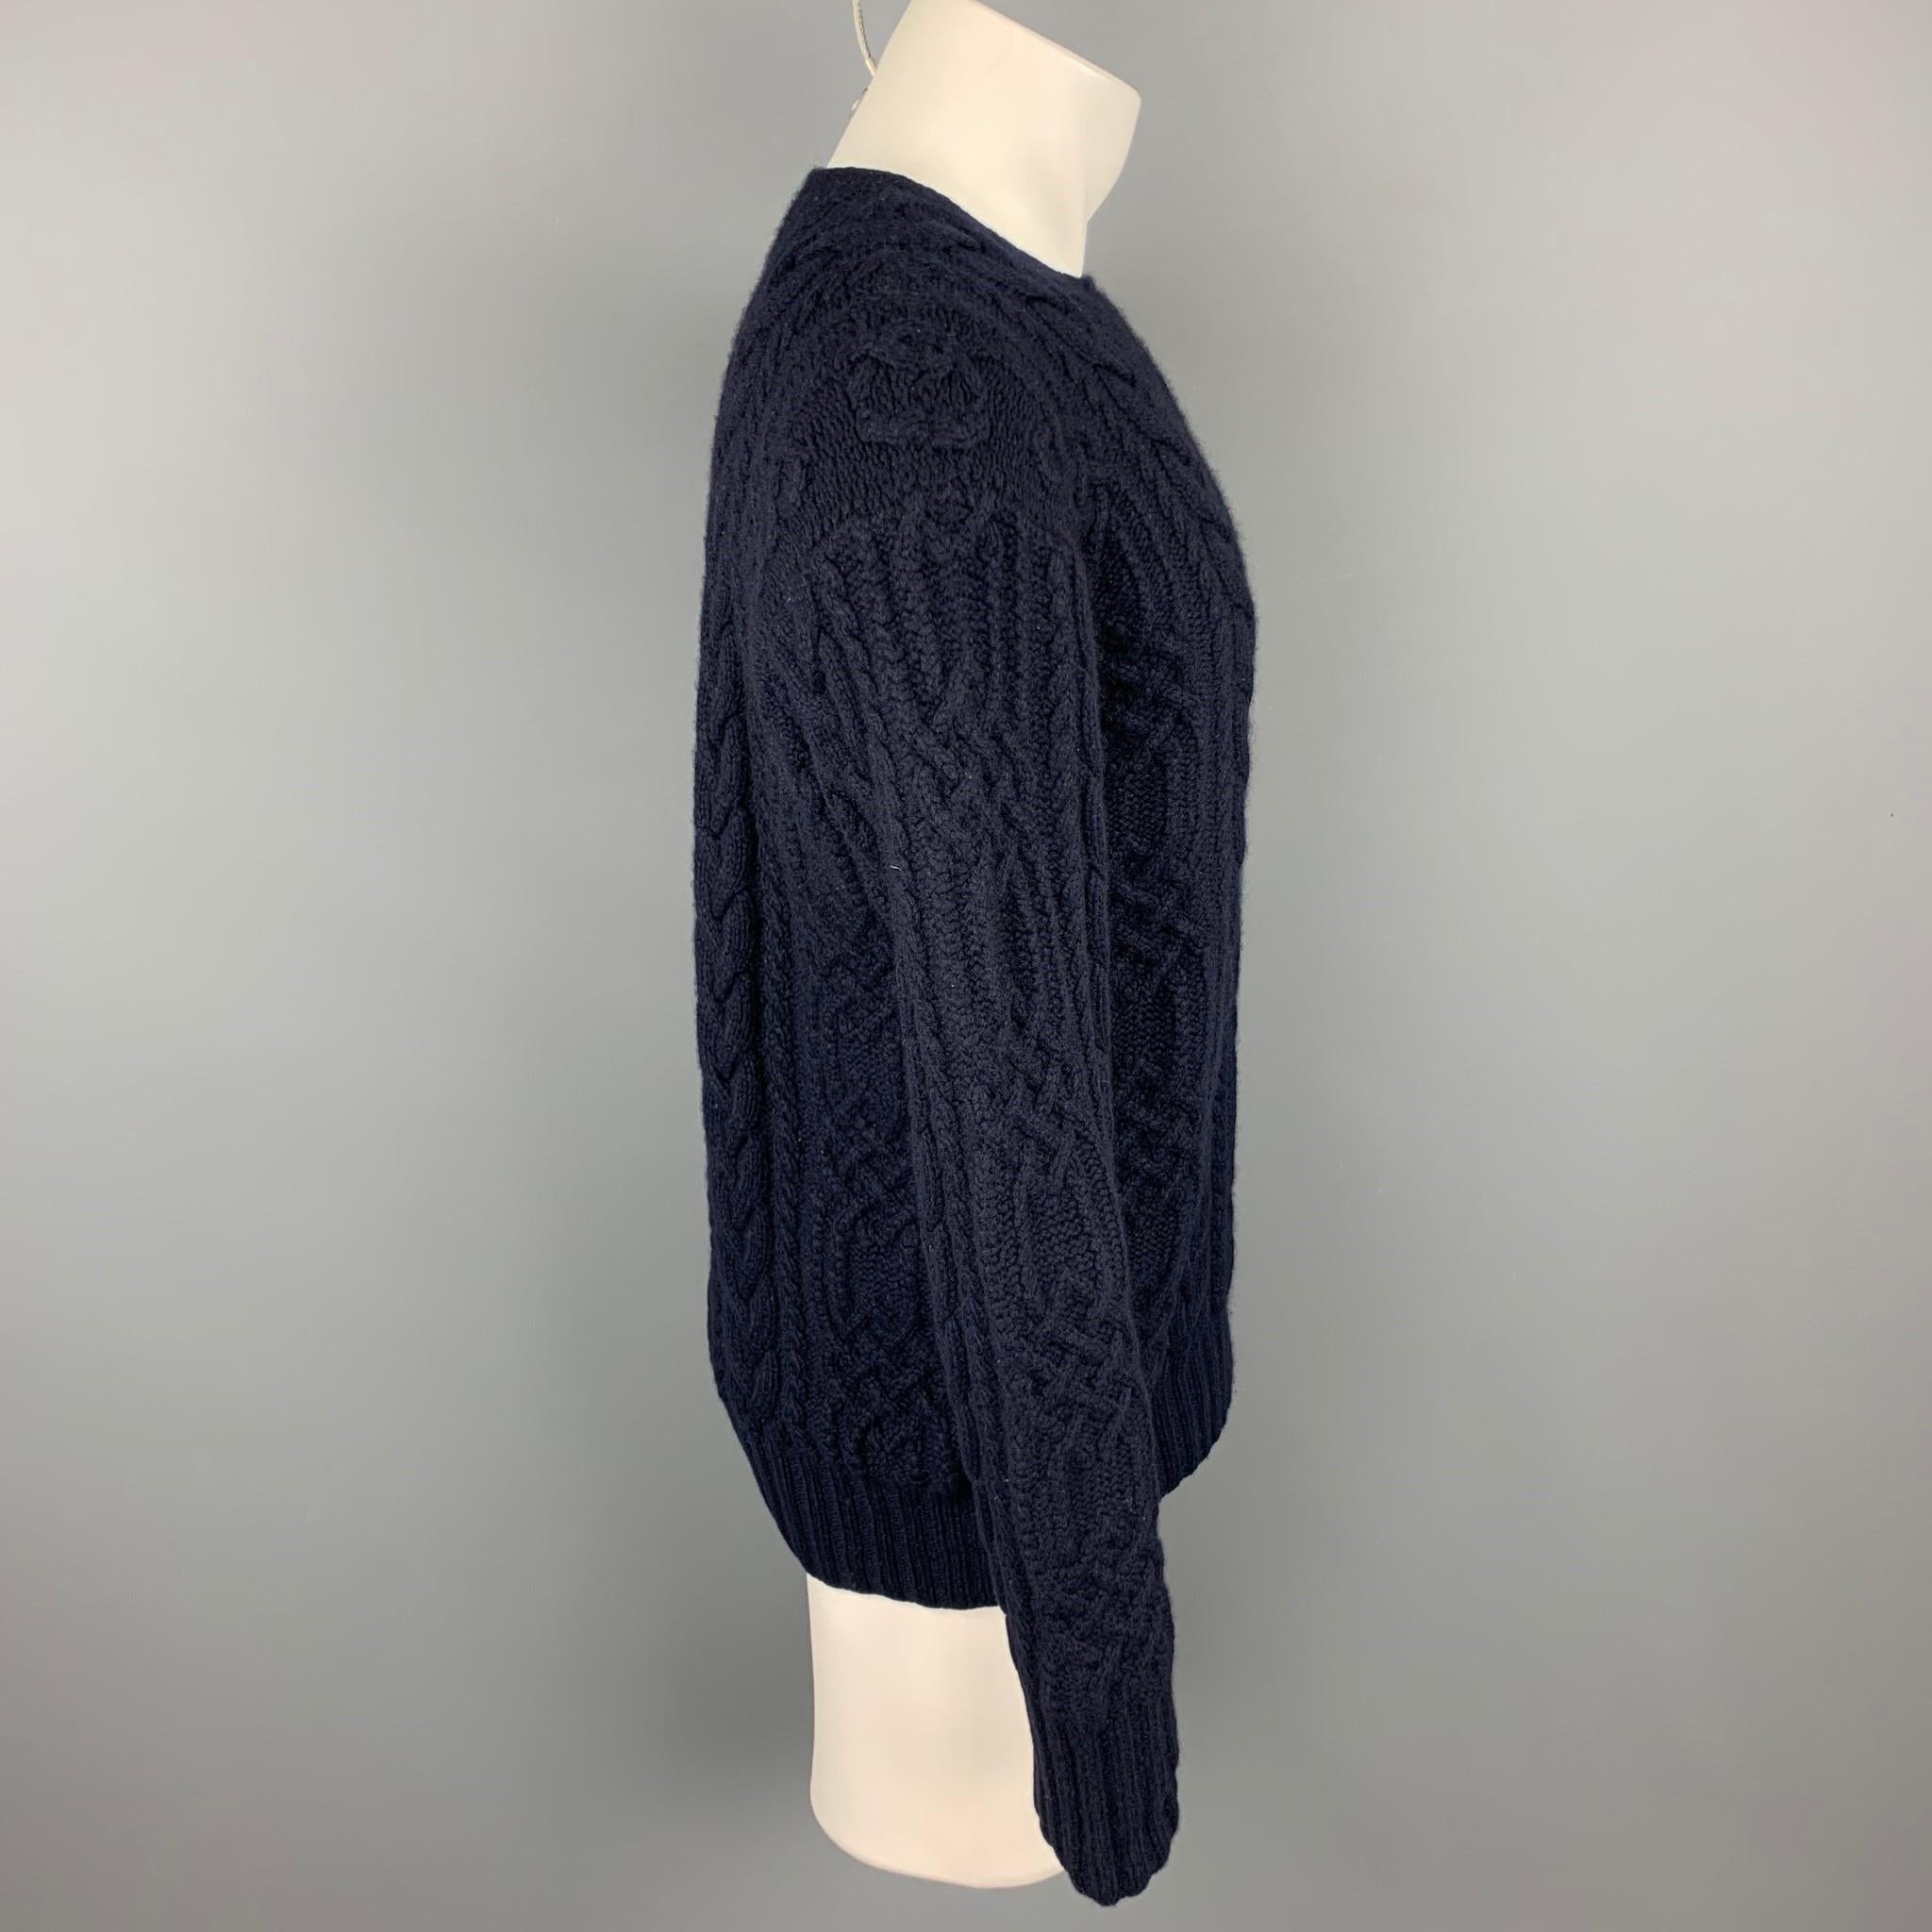 POLO by RALPH LAUREN sweater comes in a navy hand knit cashmere featuring a crew-neck.

Good Pre-Owned Condition.
Marked: 40

Measurements:

Shoulder: 19 in. 
Chest: 44 in. 
Sleeve: 30 in. 
Length: 27.5 in. 